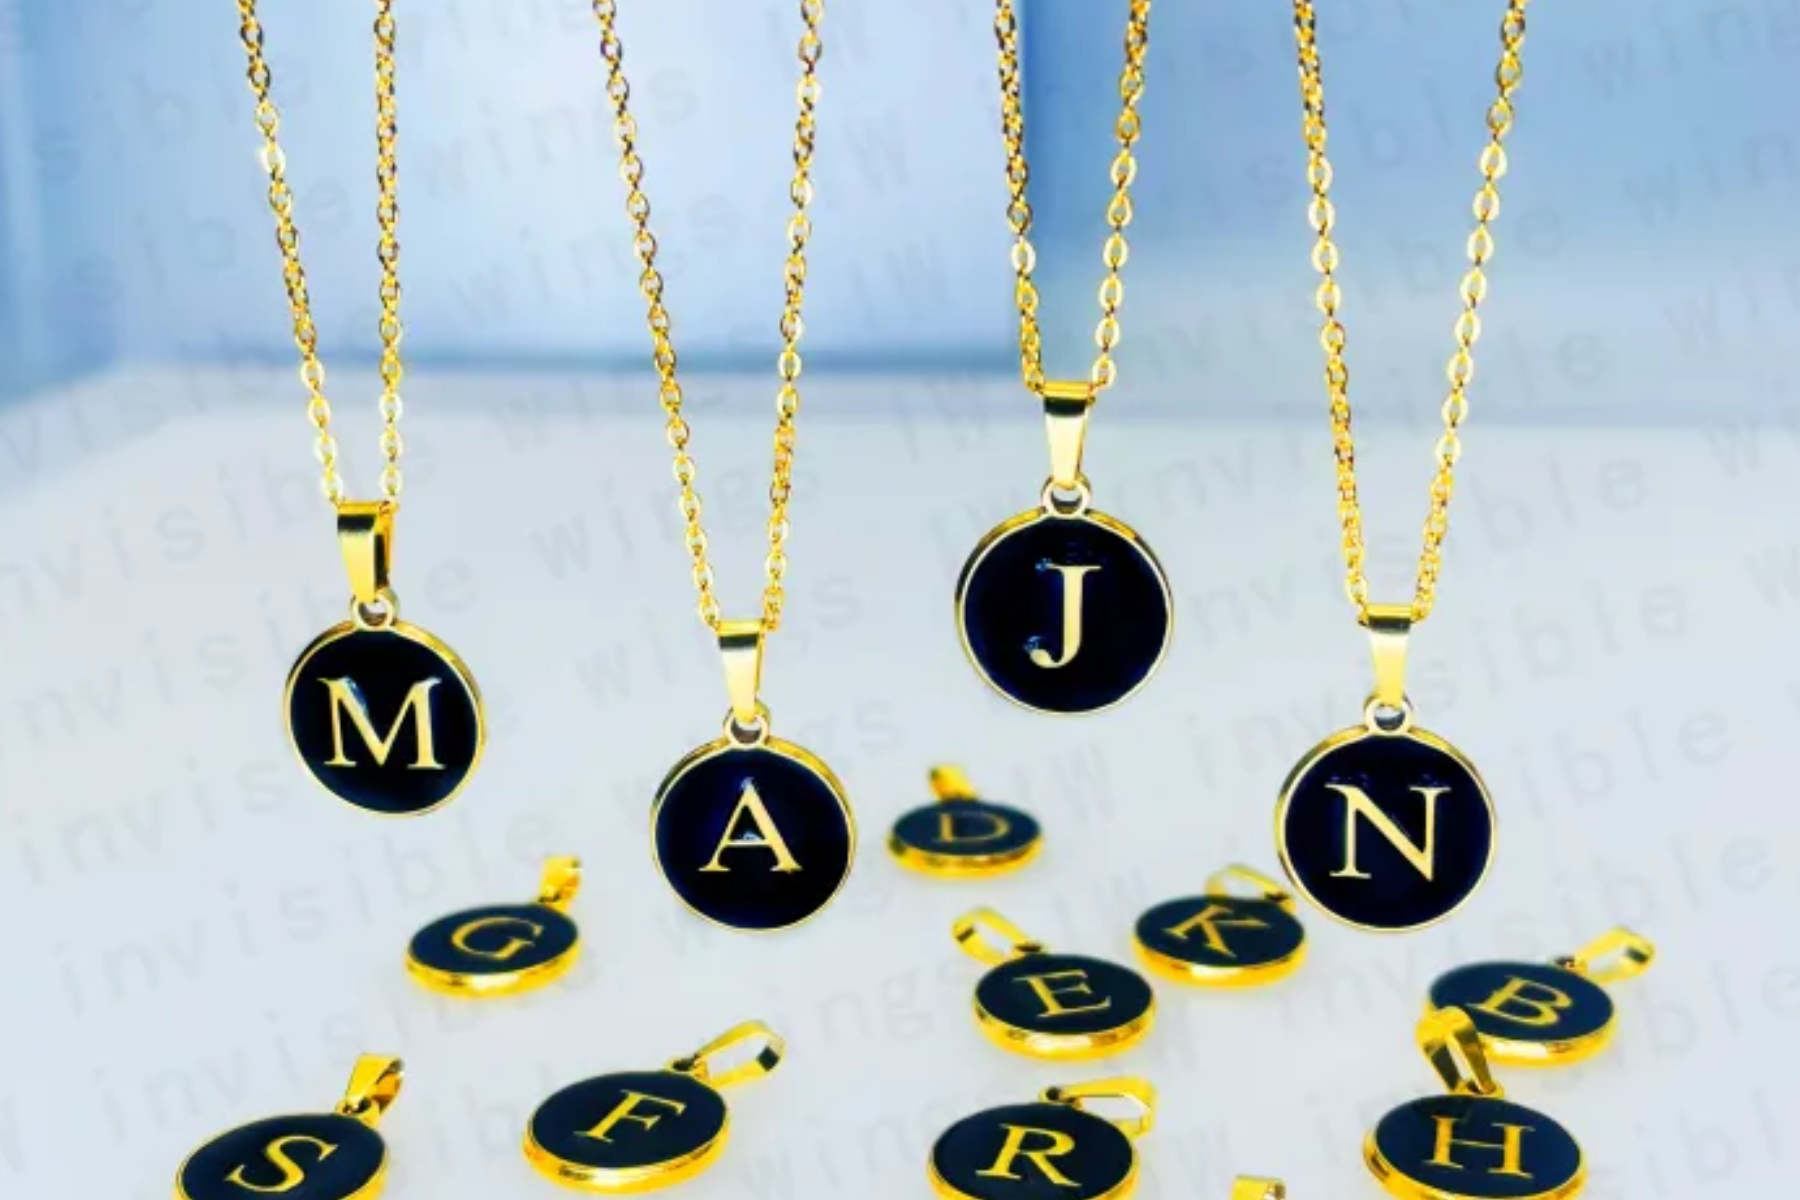 Thirteen necklaces with initials